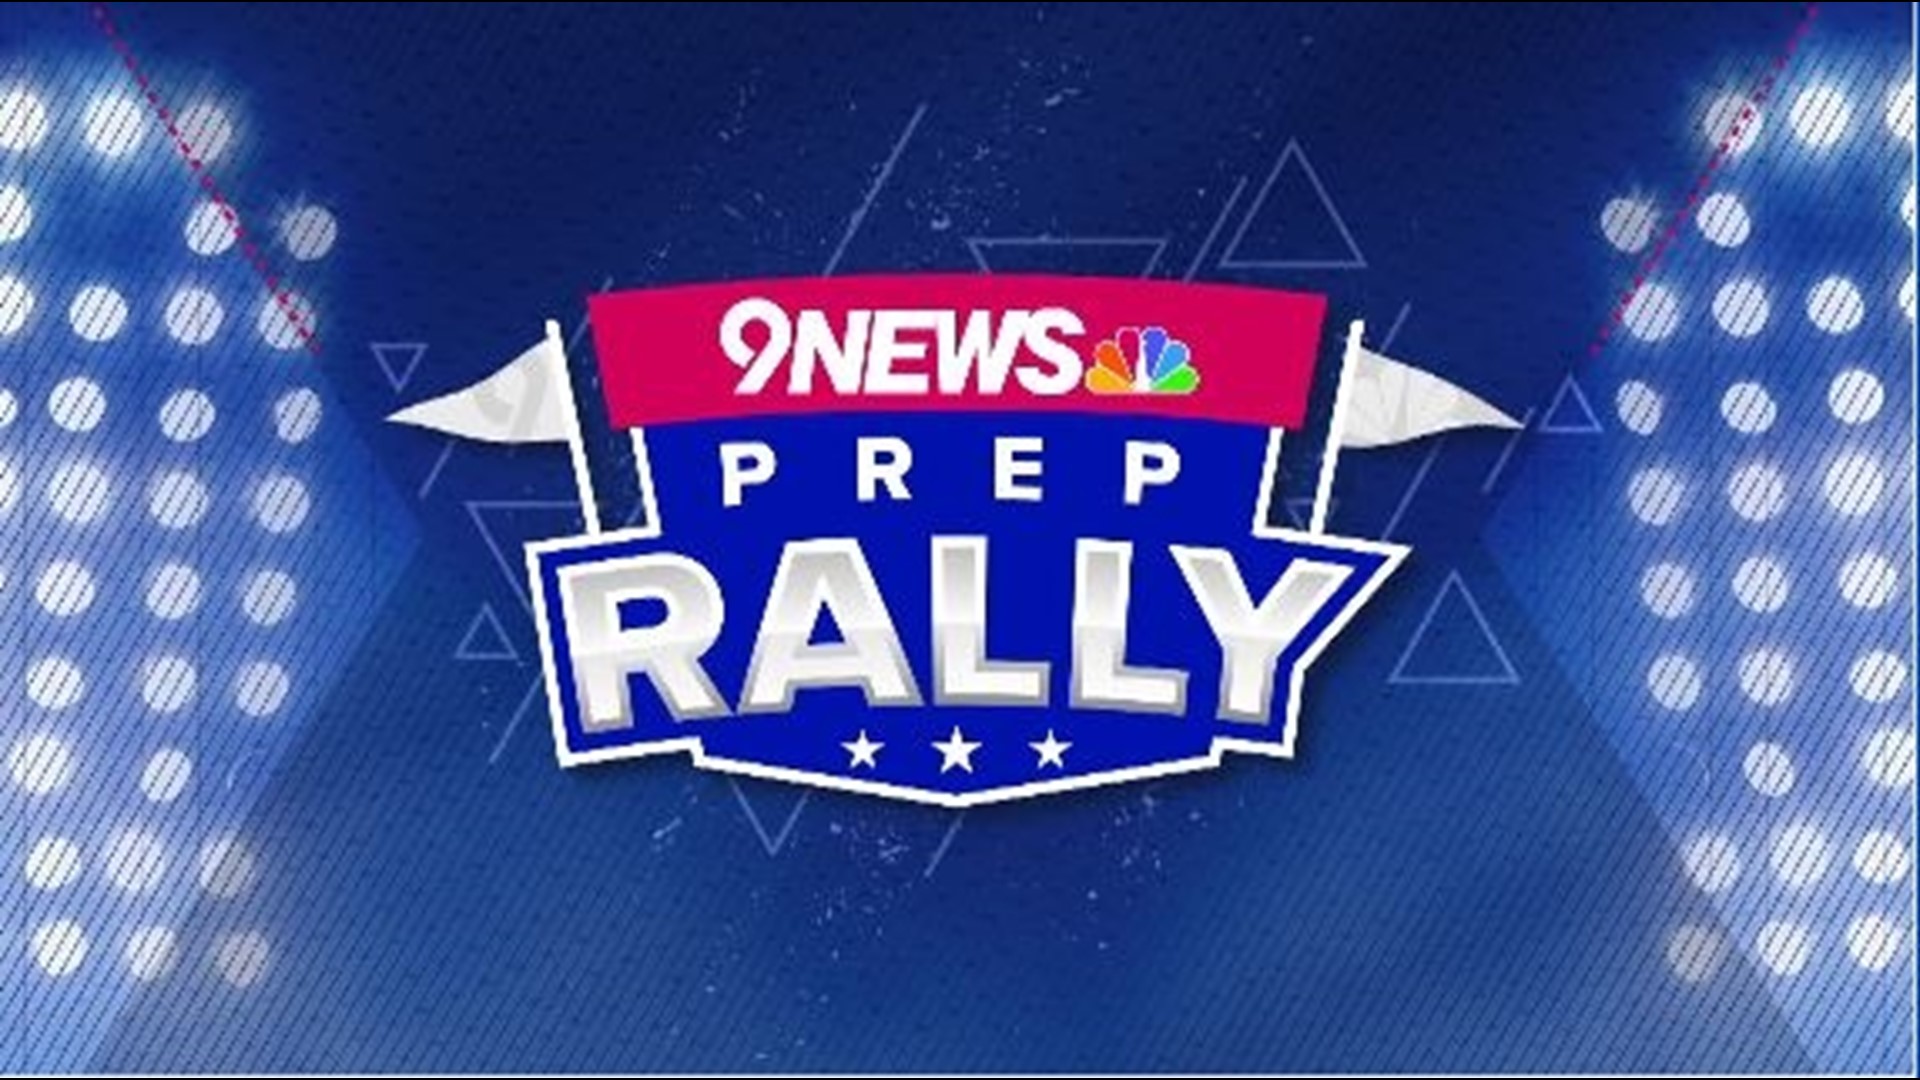 Catch up on the latest high school sports news with the Saturday morning 9NEWS Prep Rally!